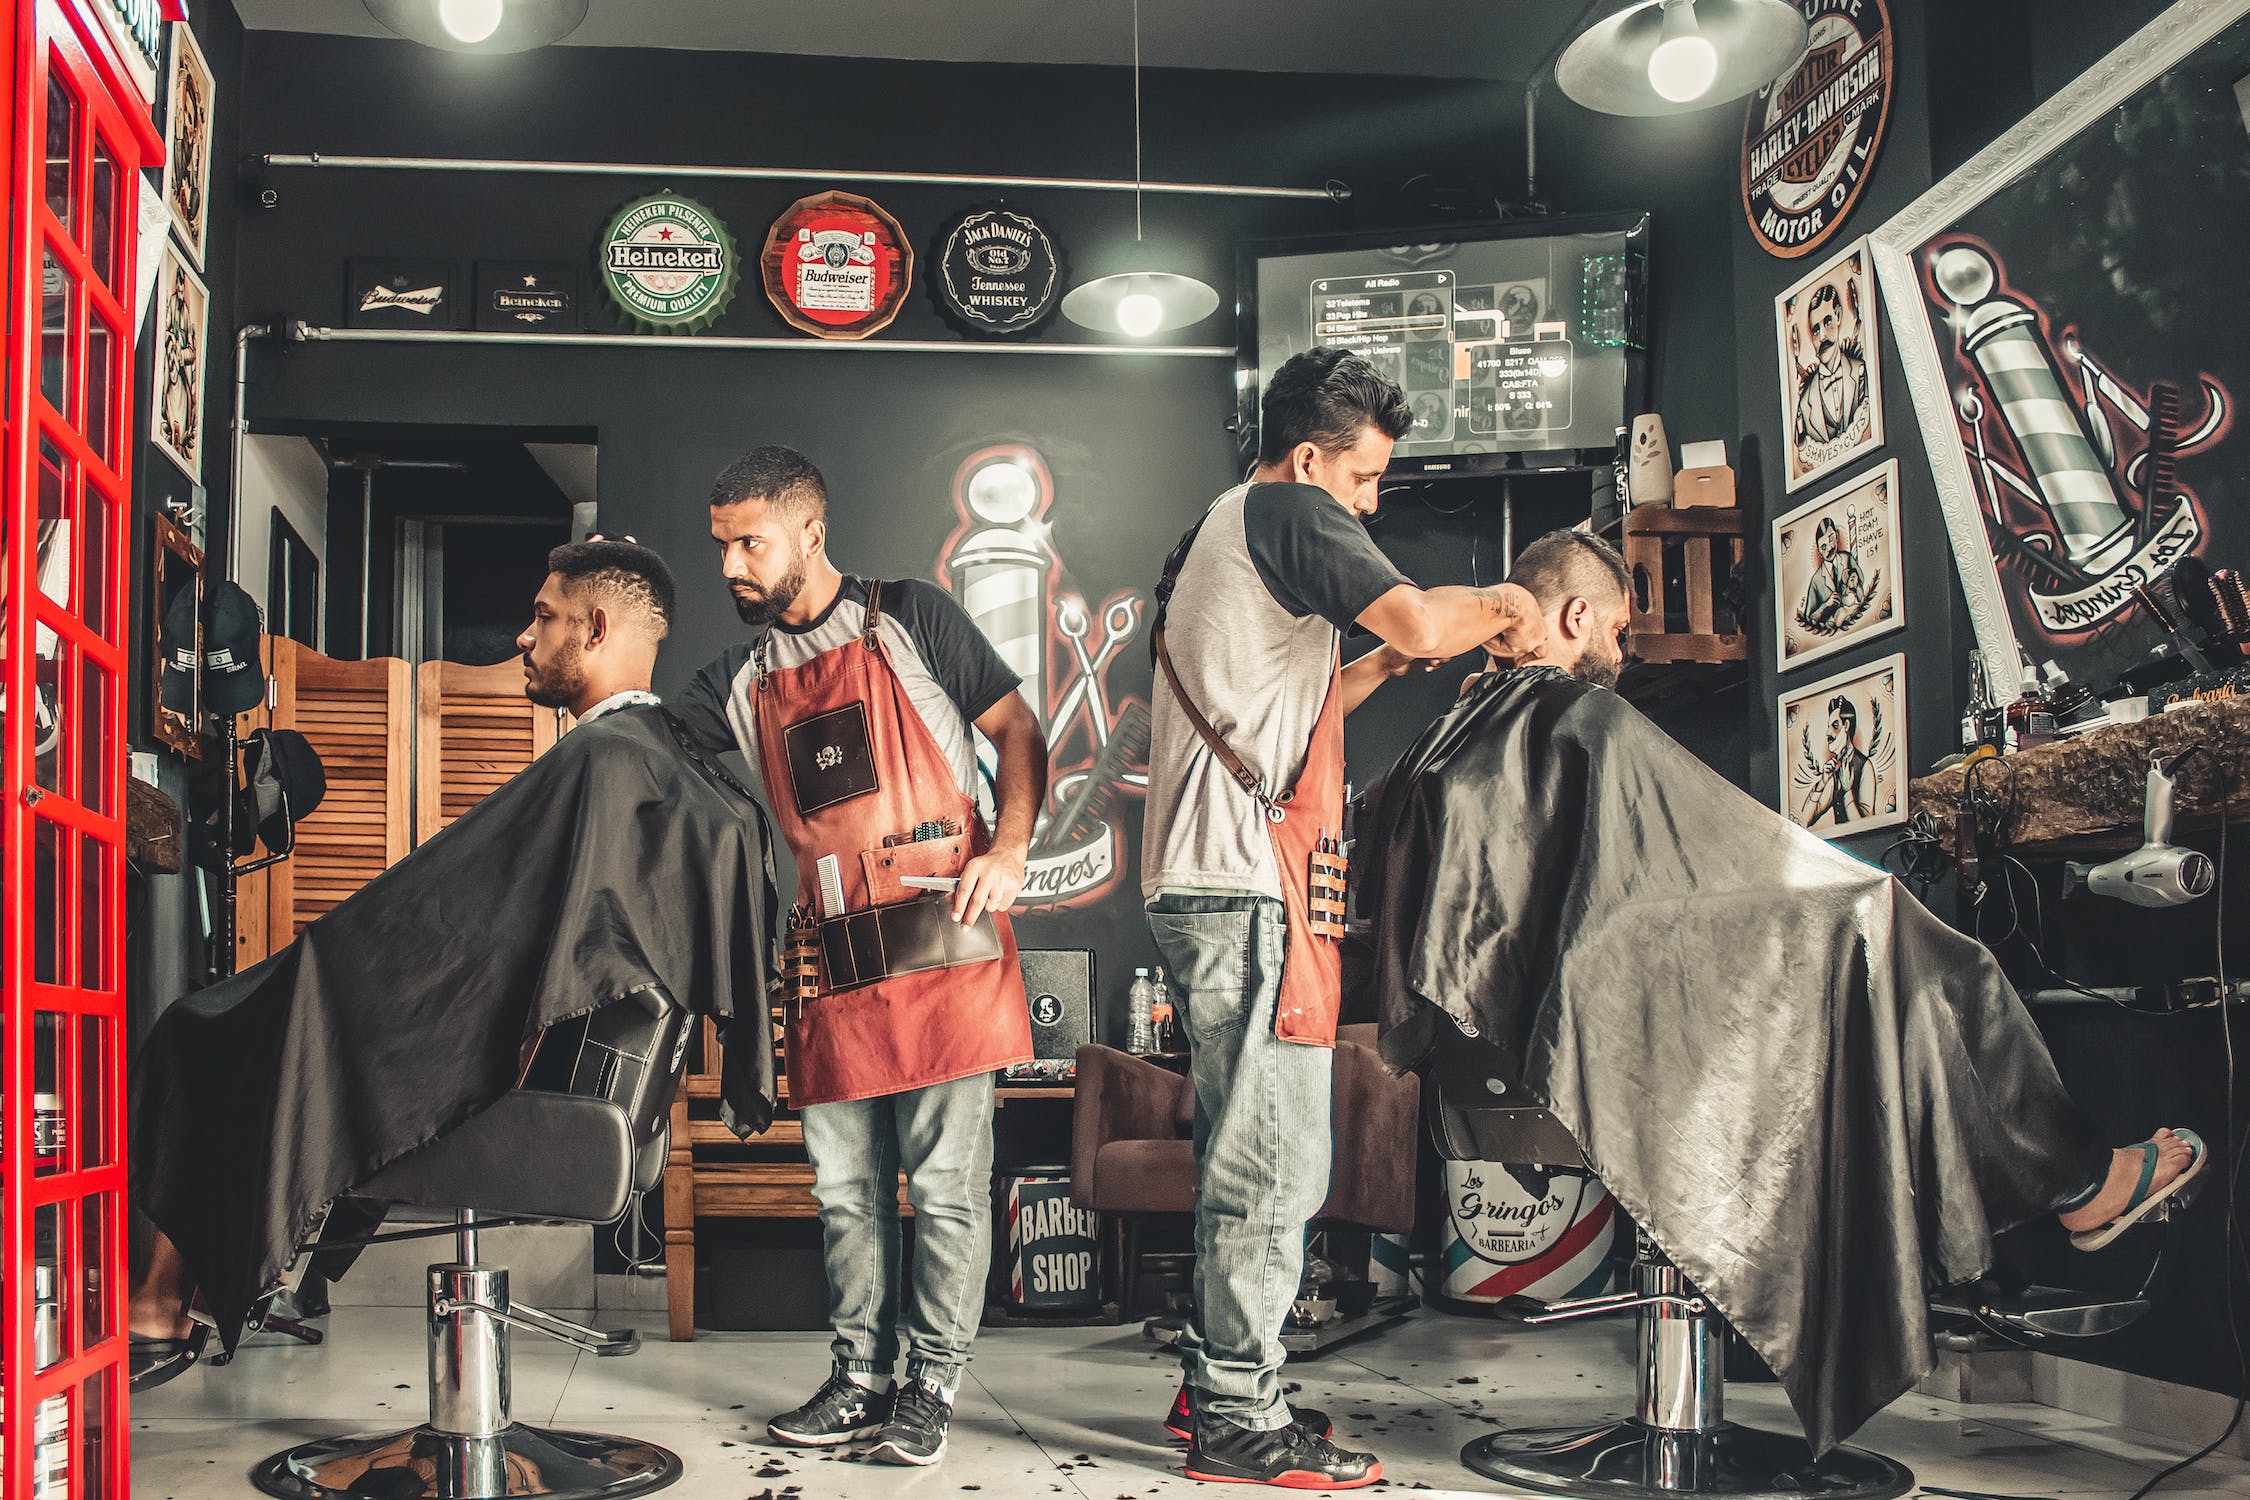 Interior image of a barbershop with two barbers cutting their customers hair